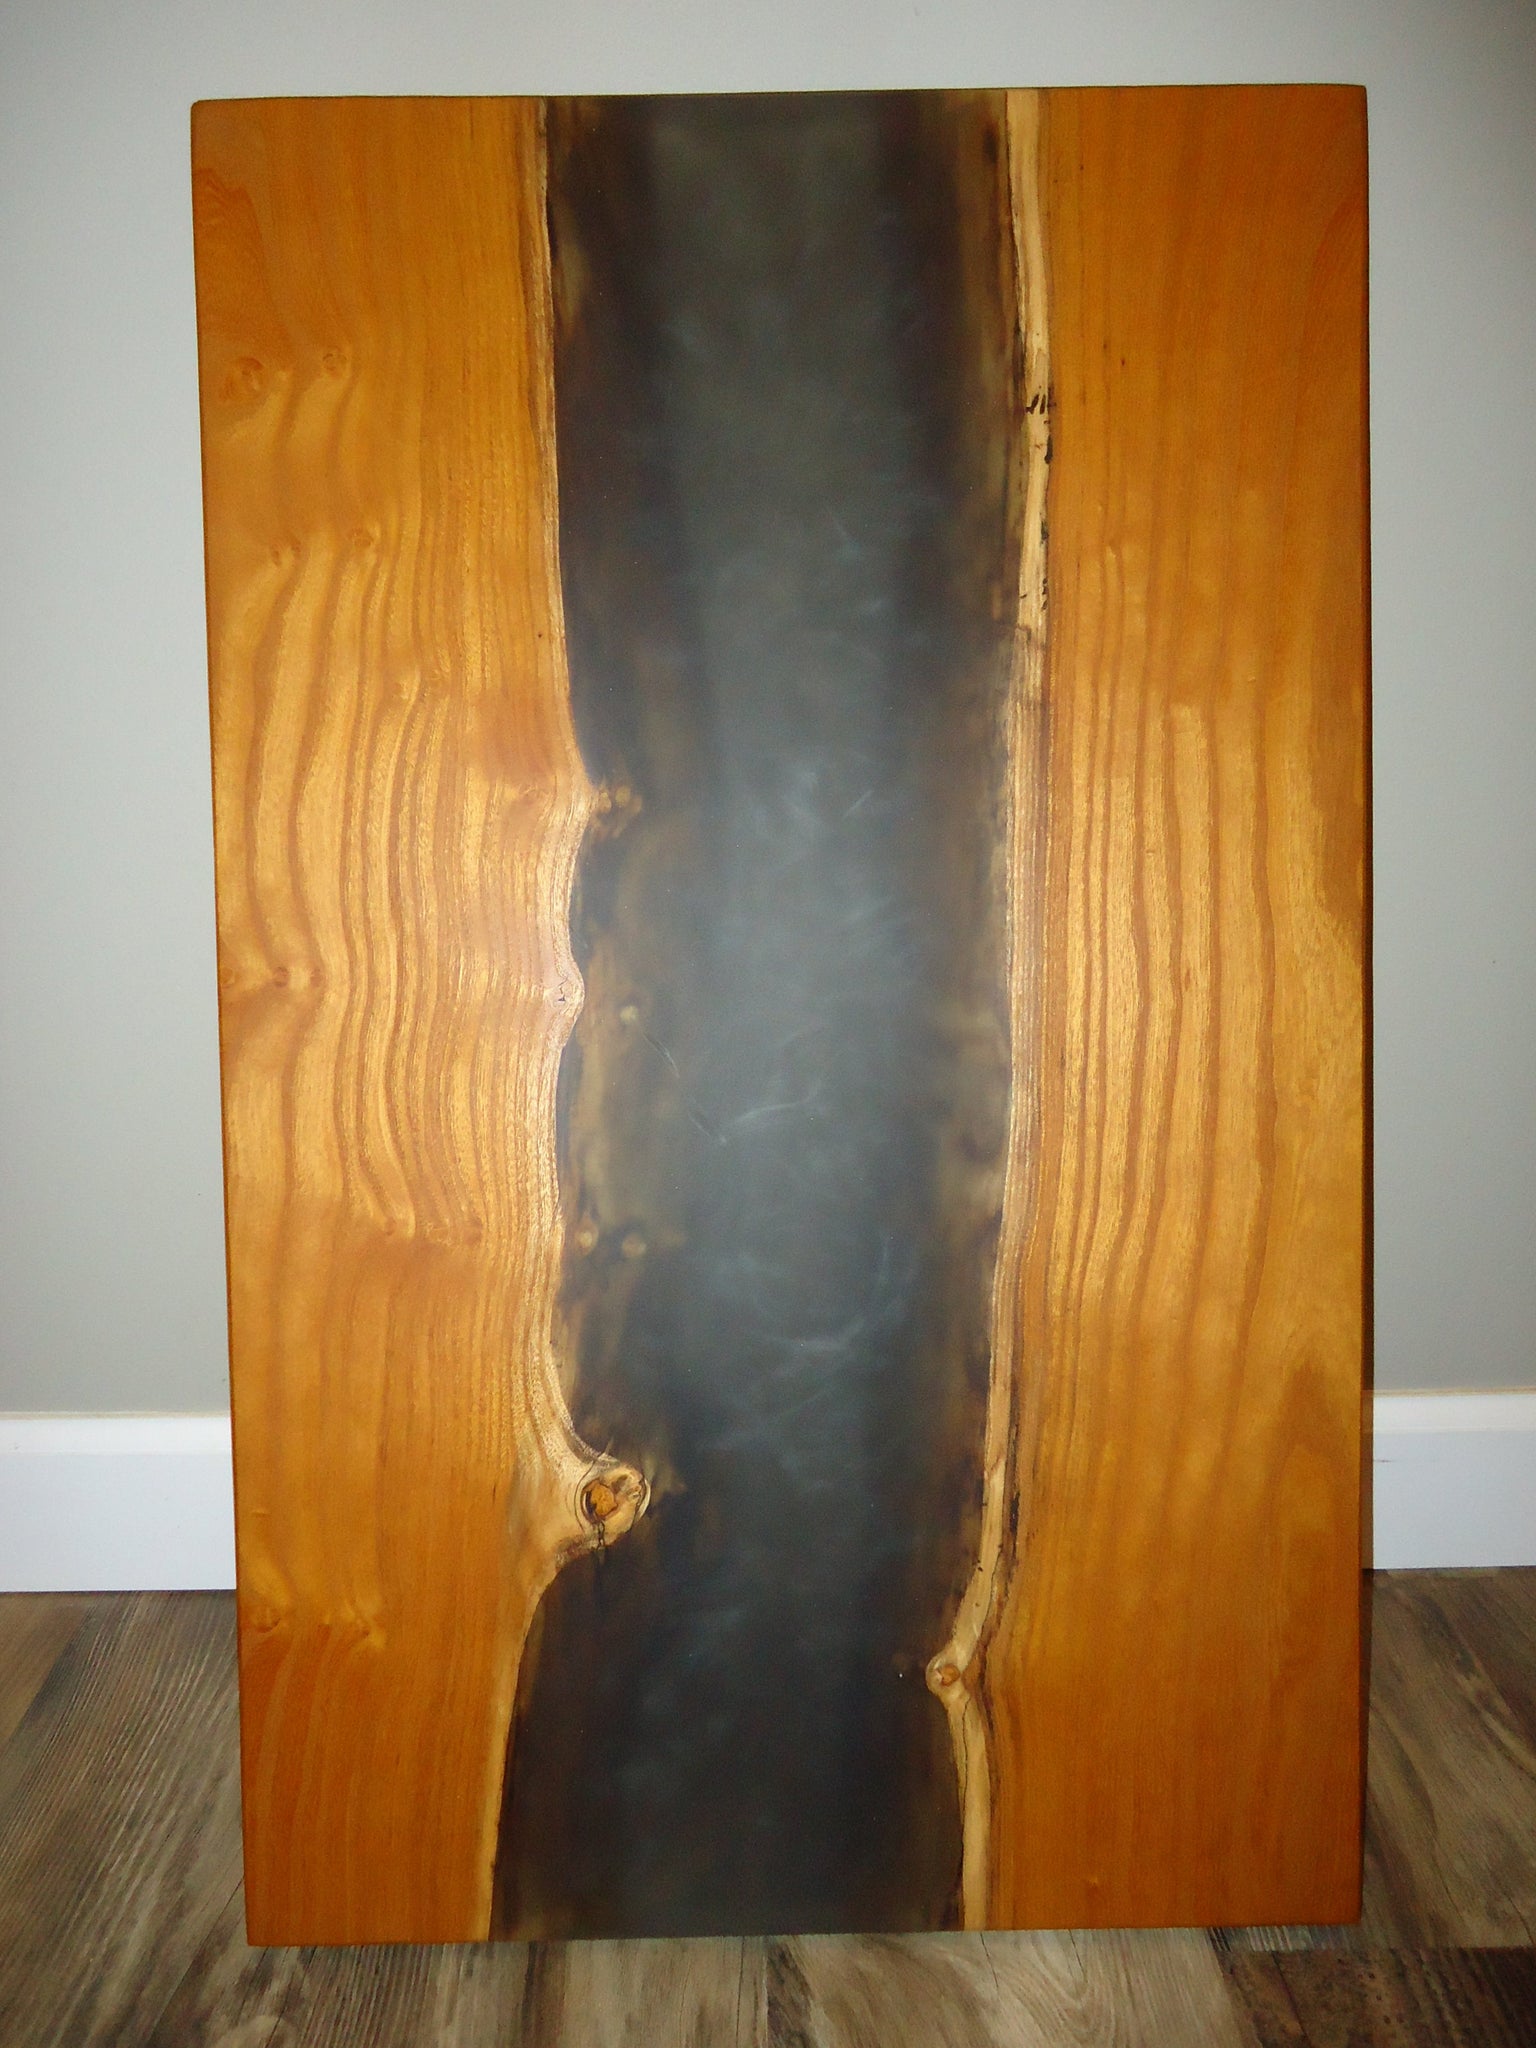 Table Top, 18x30" Mulberry River End Table with Smokey Translucent Resin